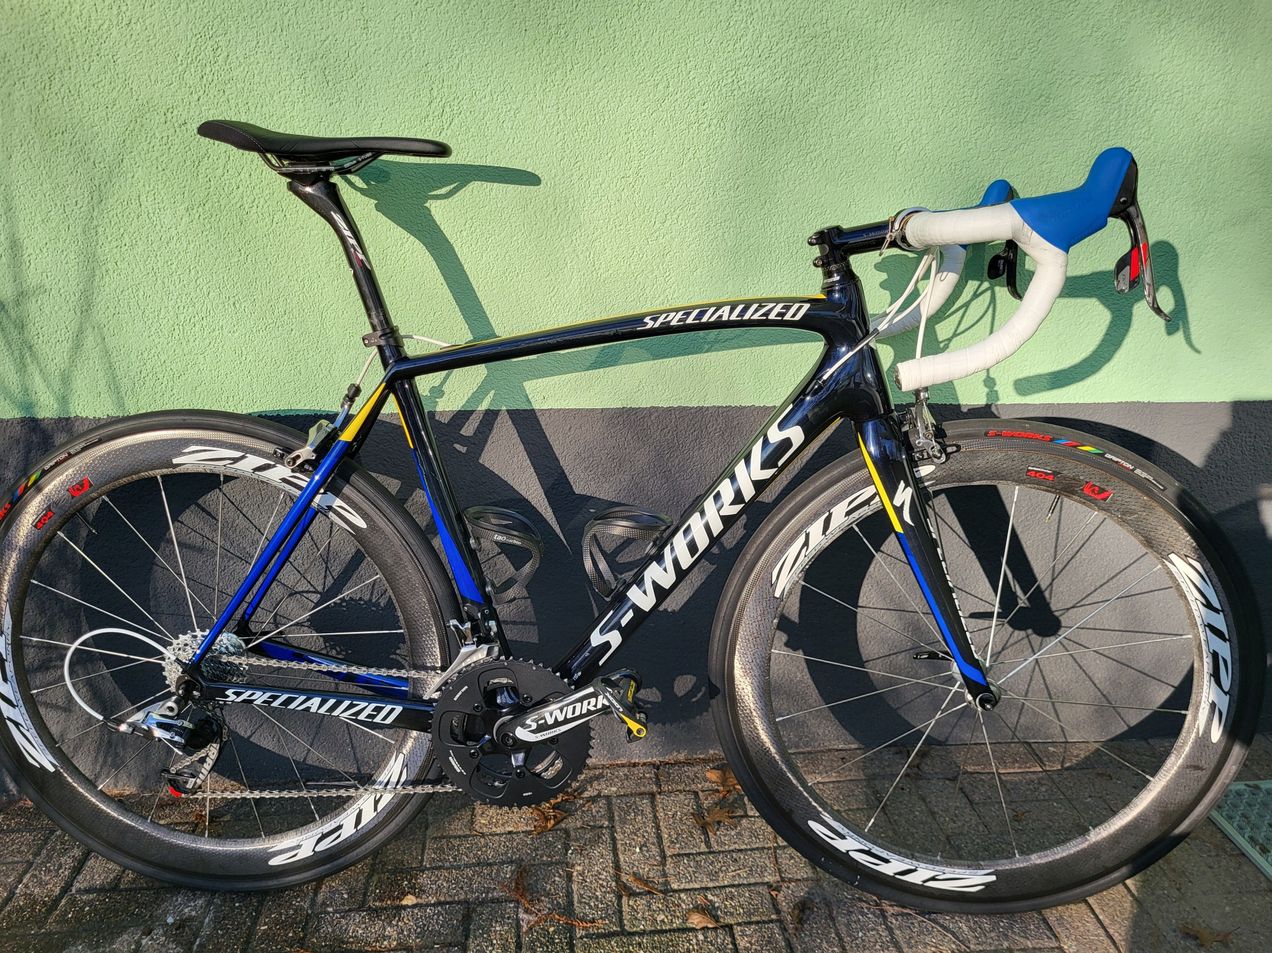 Specialized S-Works Tarmac SL4 used in 54 cm | buycycle USA